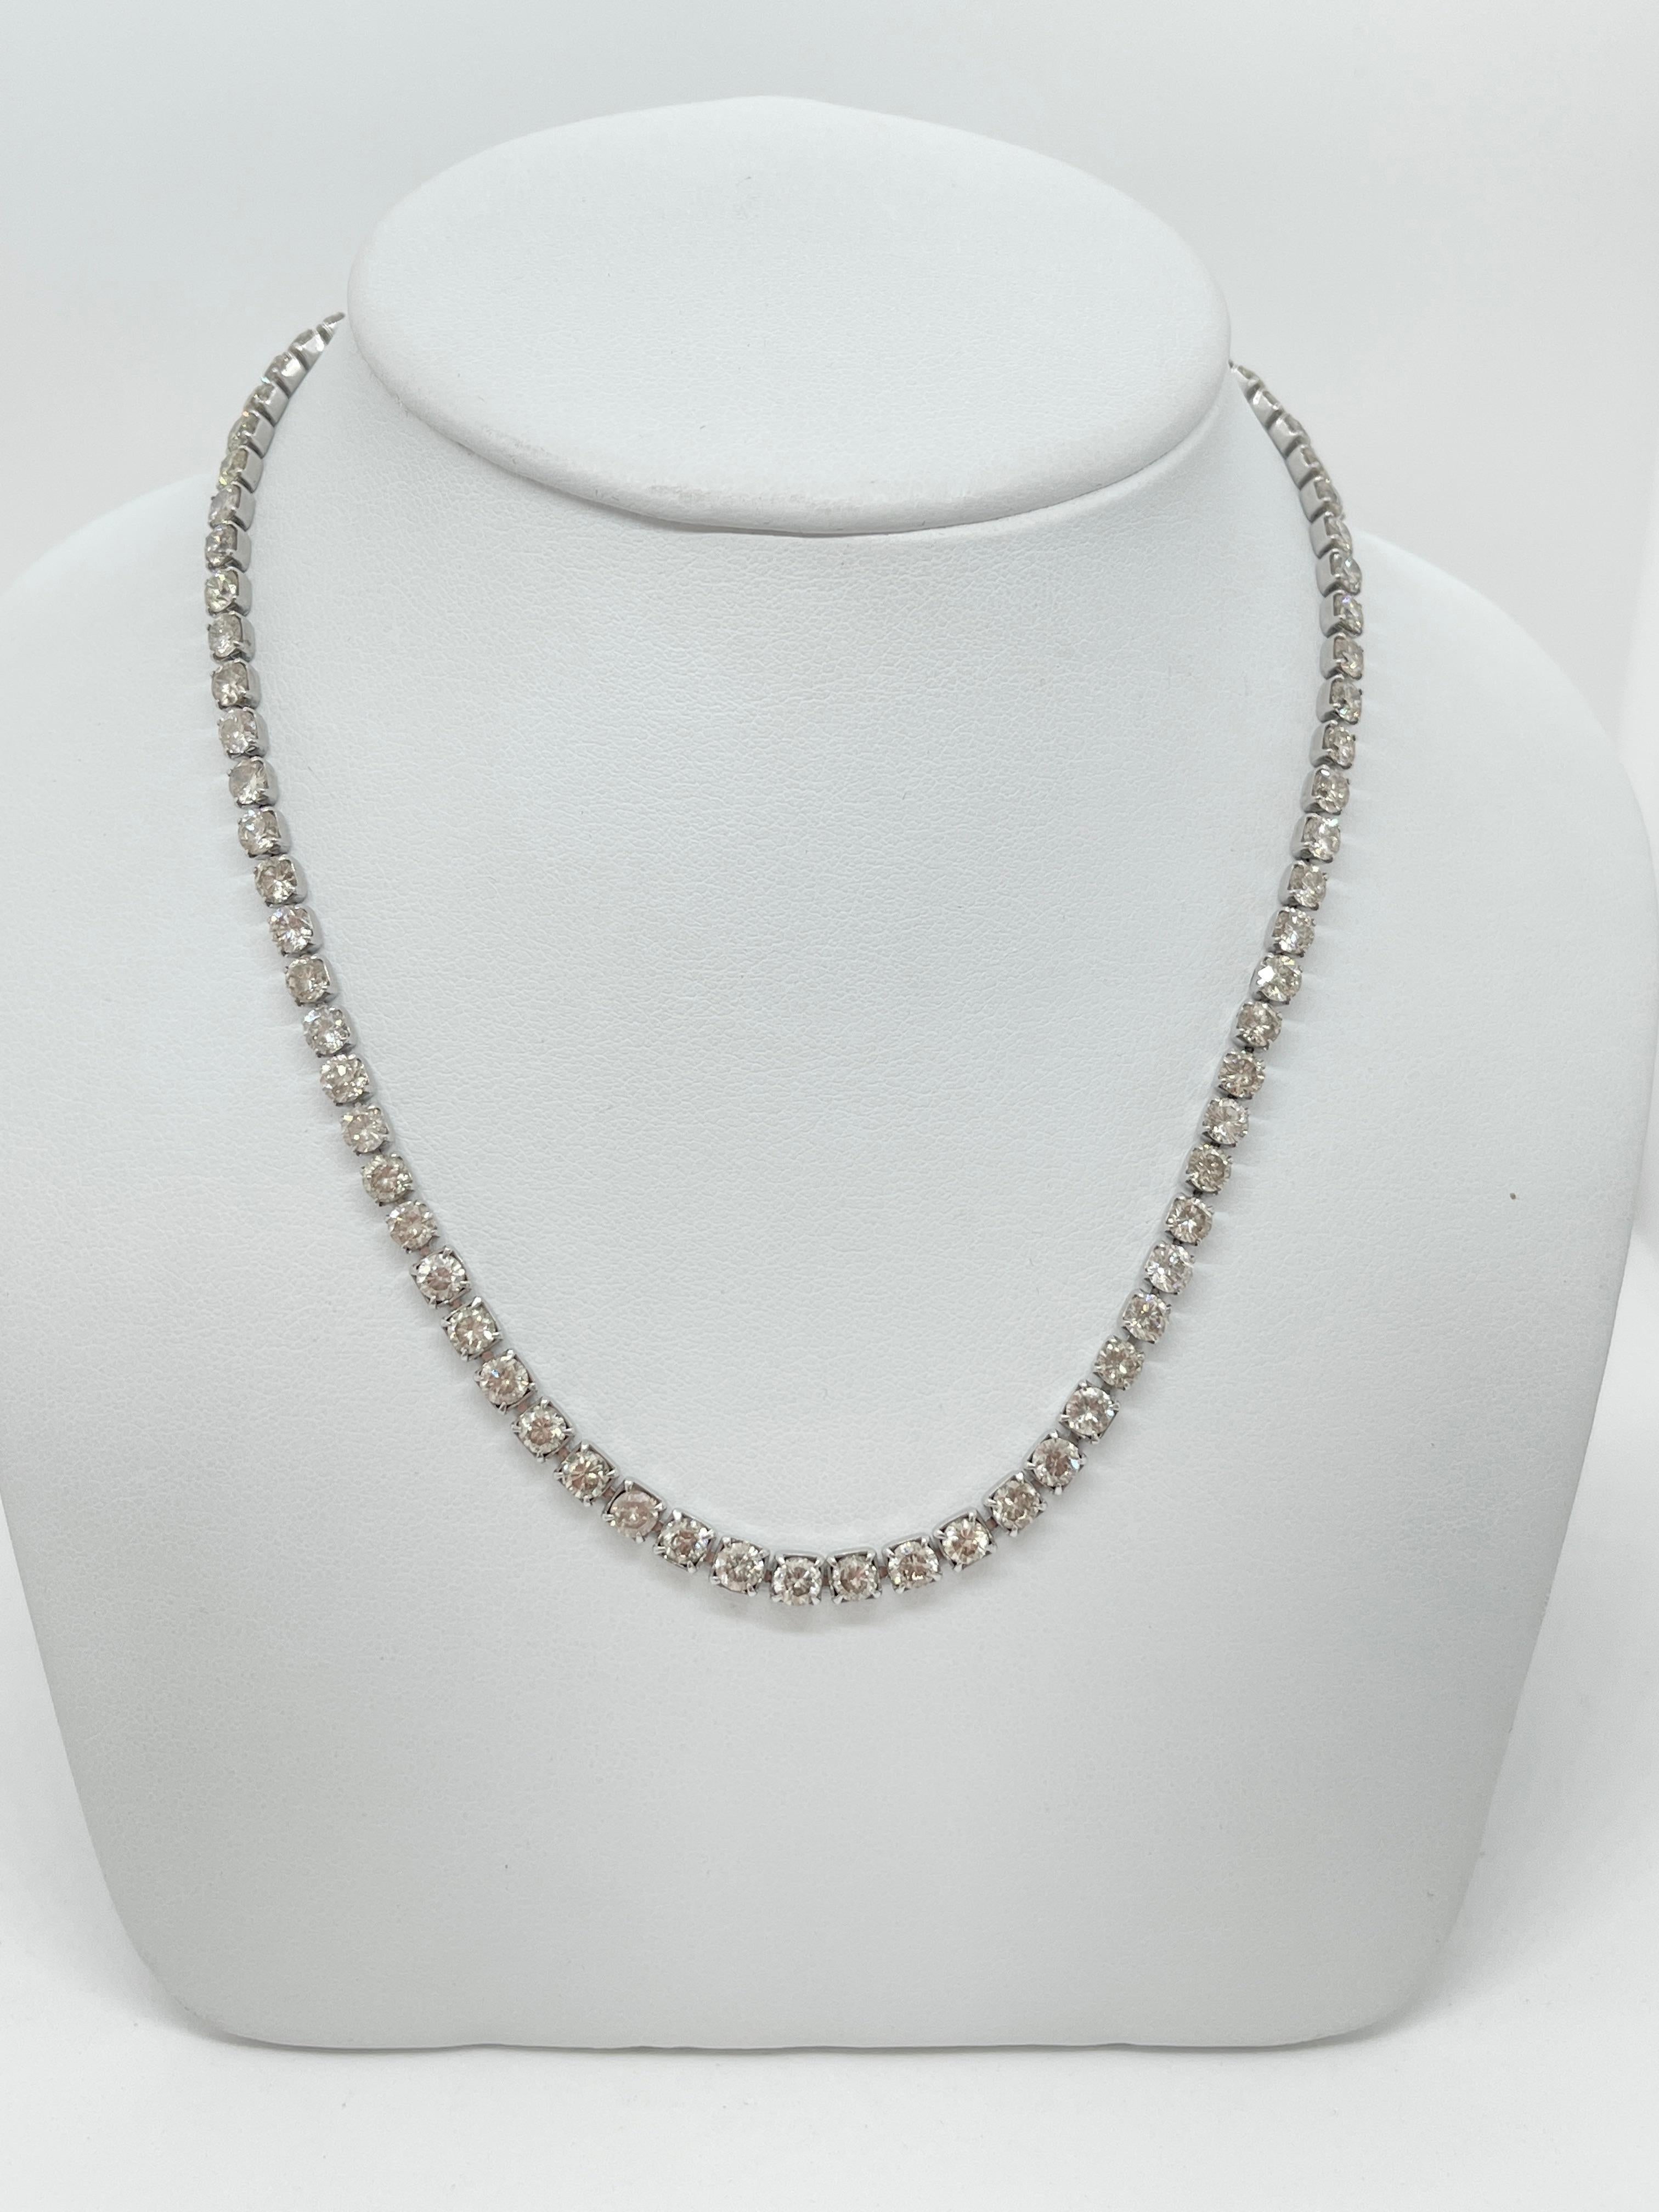 Vintage Earth Mined Genuine Diamond Platinum Necklace Circa 1940s with Valuation In Good Condition For Sale In Mona Vale, NSW